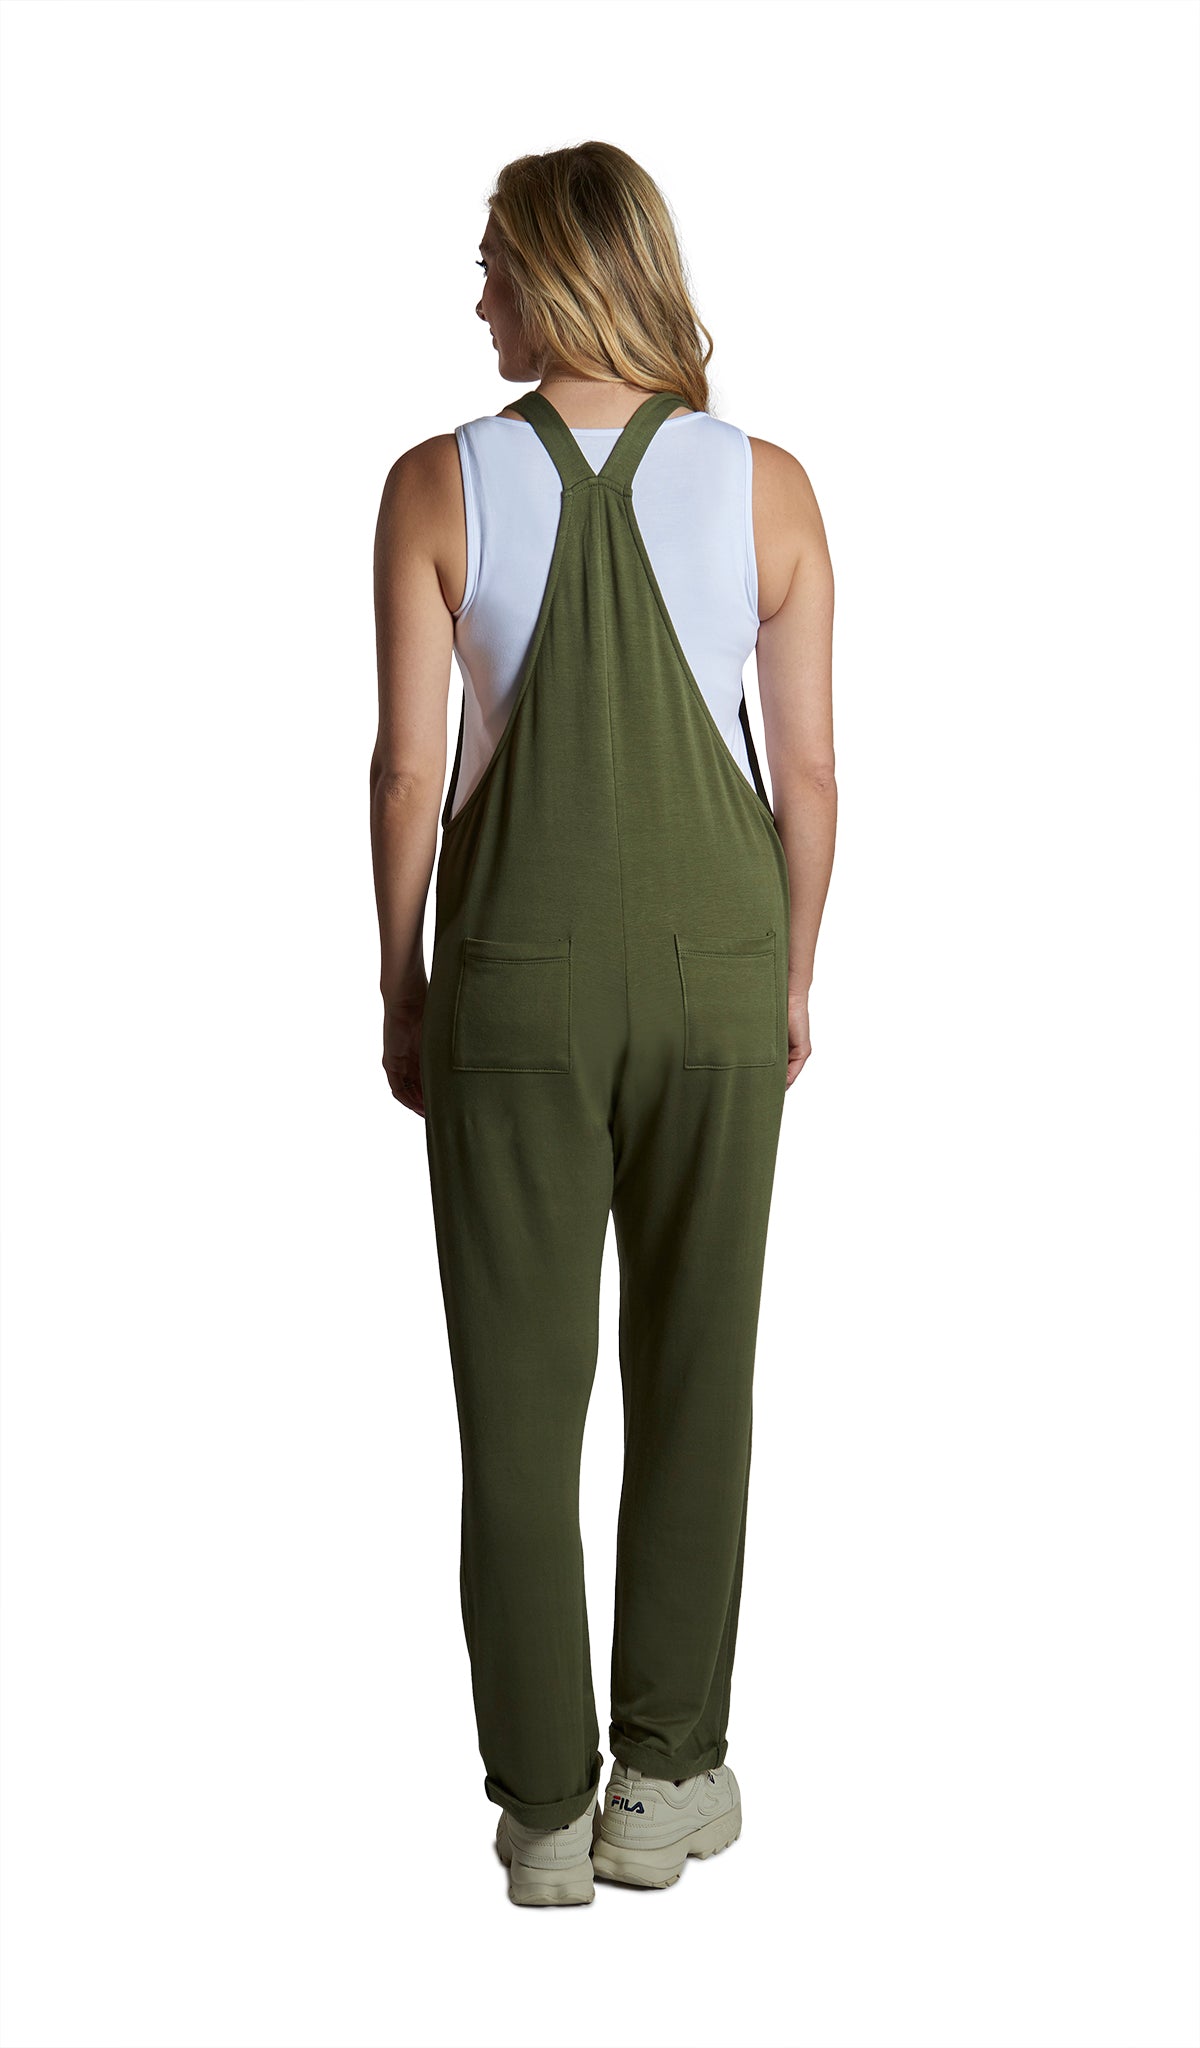 French Terry Olive Natalie Overall. Back shot image of woman wearing short sleeve tee under Natalie overall with two back pockets.